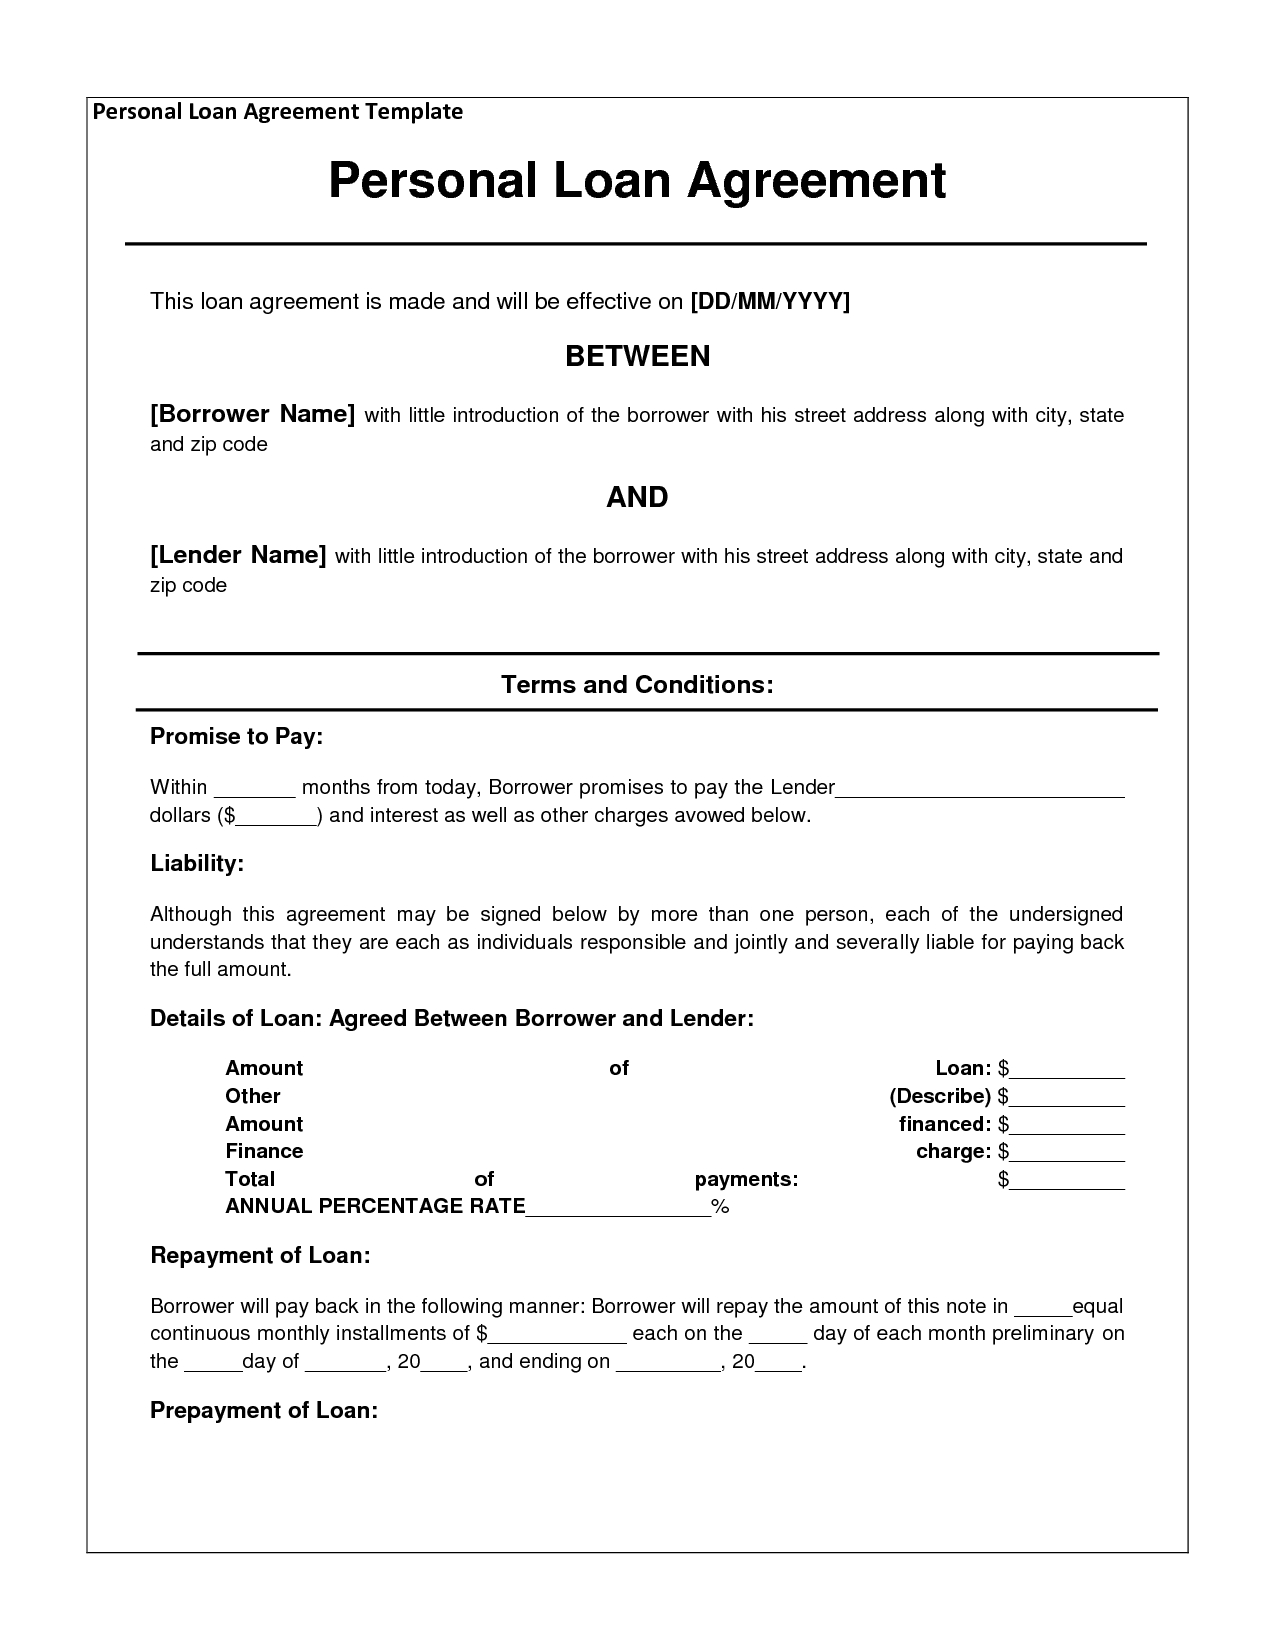 Personal Loan Repayment Letter Template - Free Personal Loan Agreement form Template $1000 Approved In 2